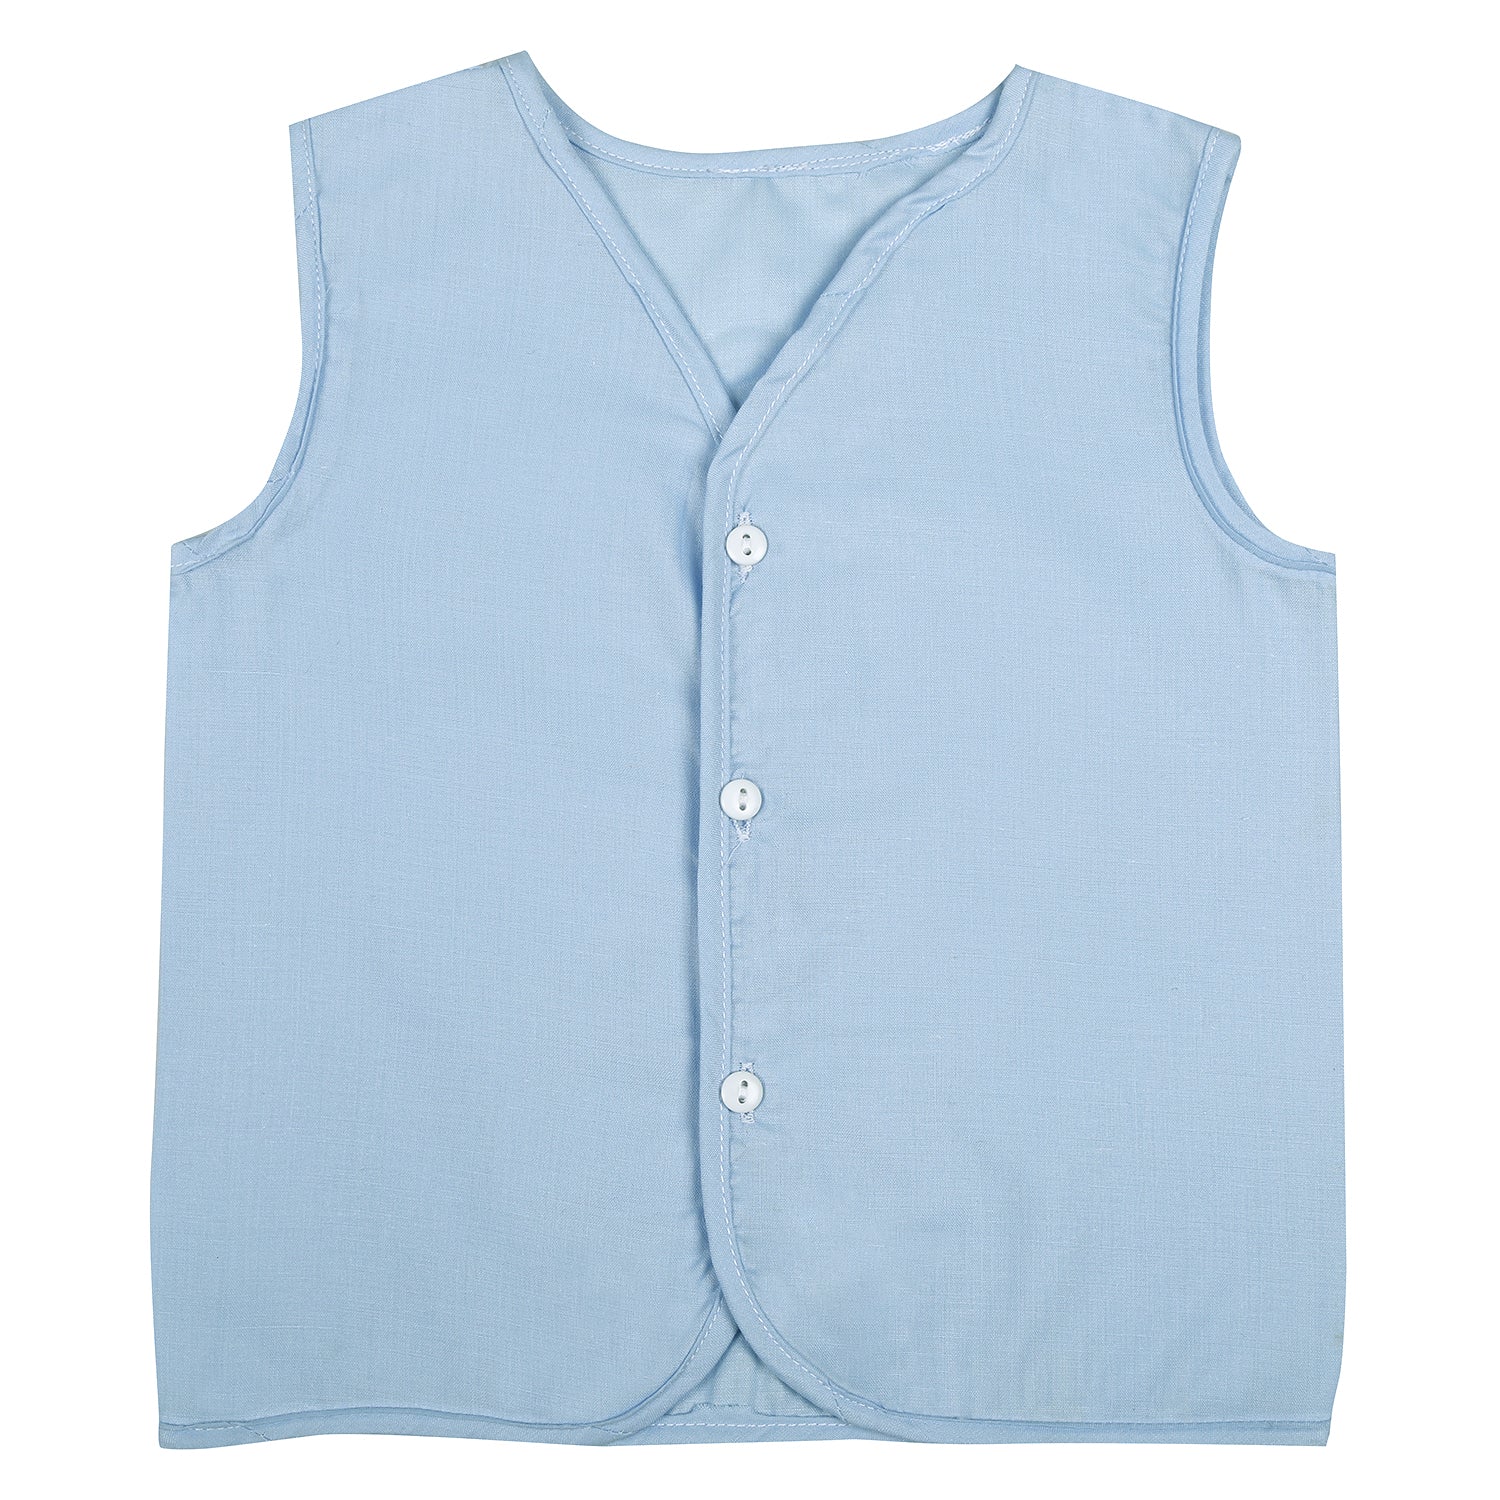 Baby Moo Solid V-Neck Sleeveless Front Opening Button Cotton Jhablas 5 Pcs - Blue, Multicolour